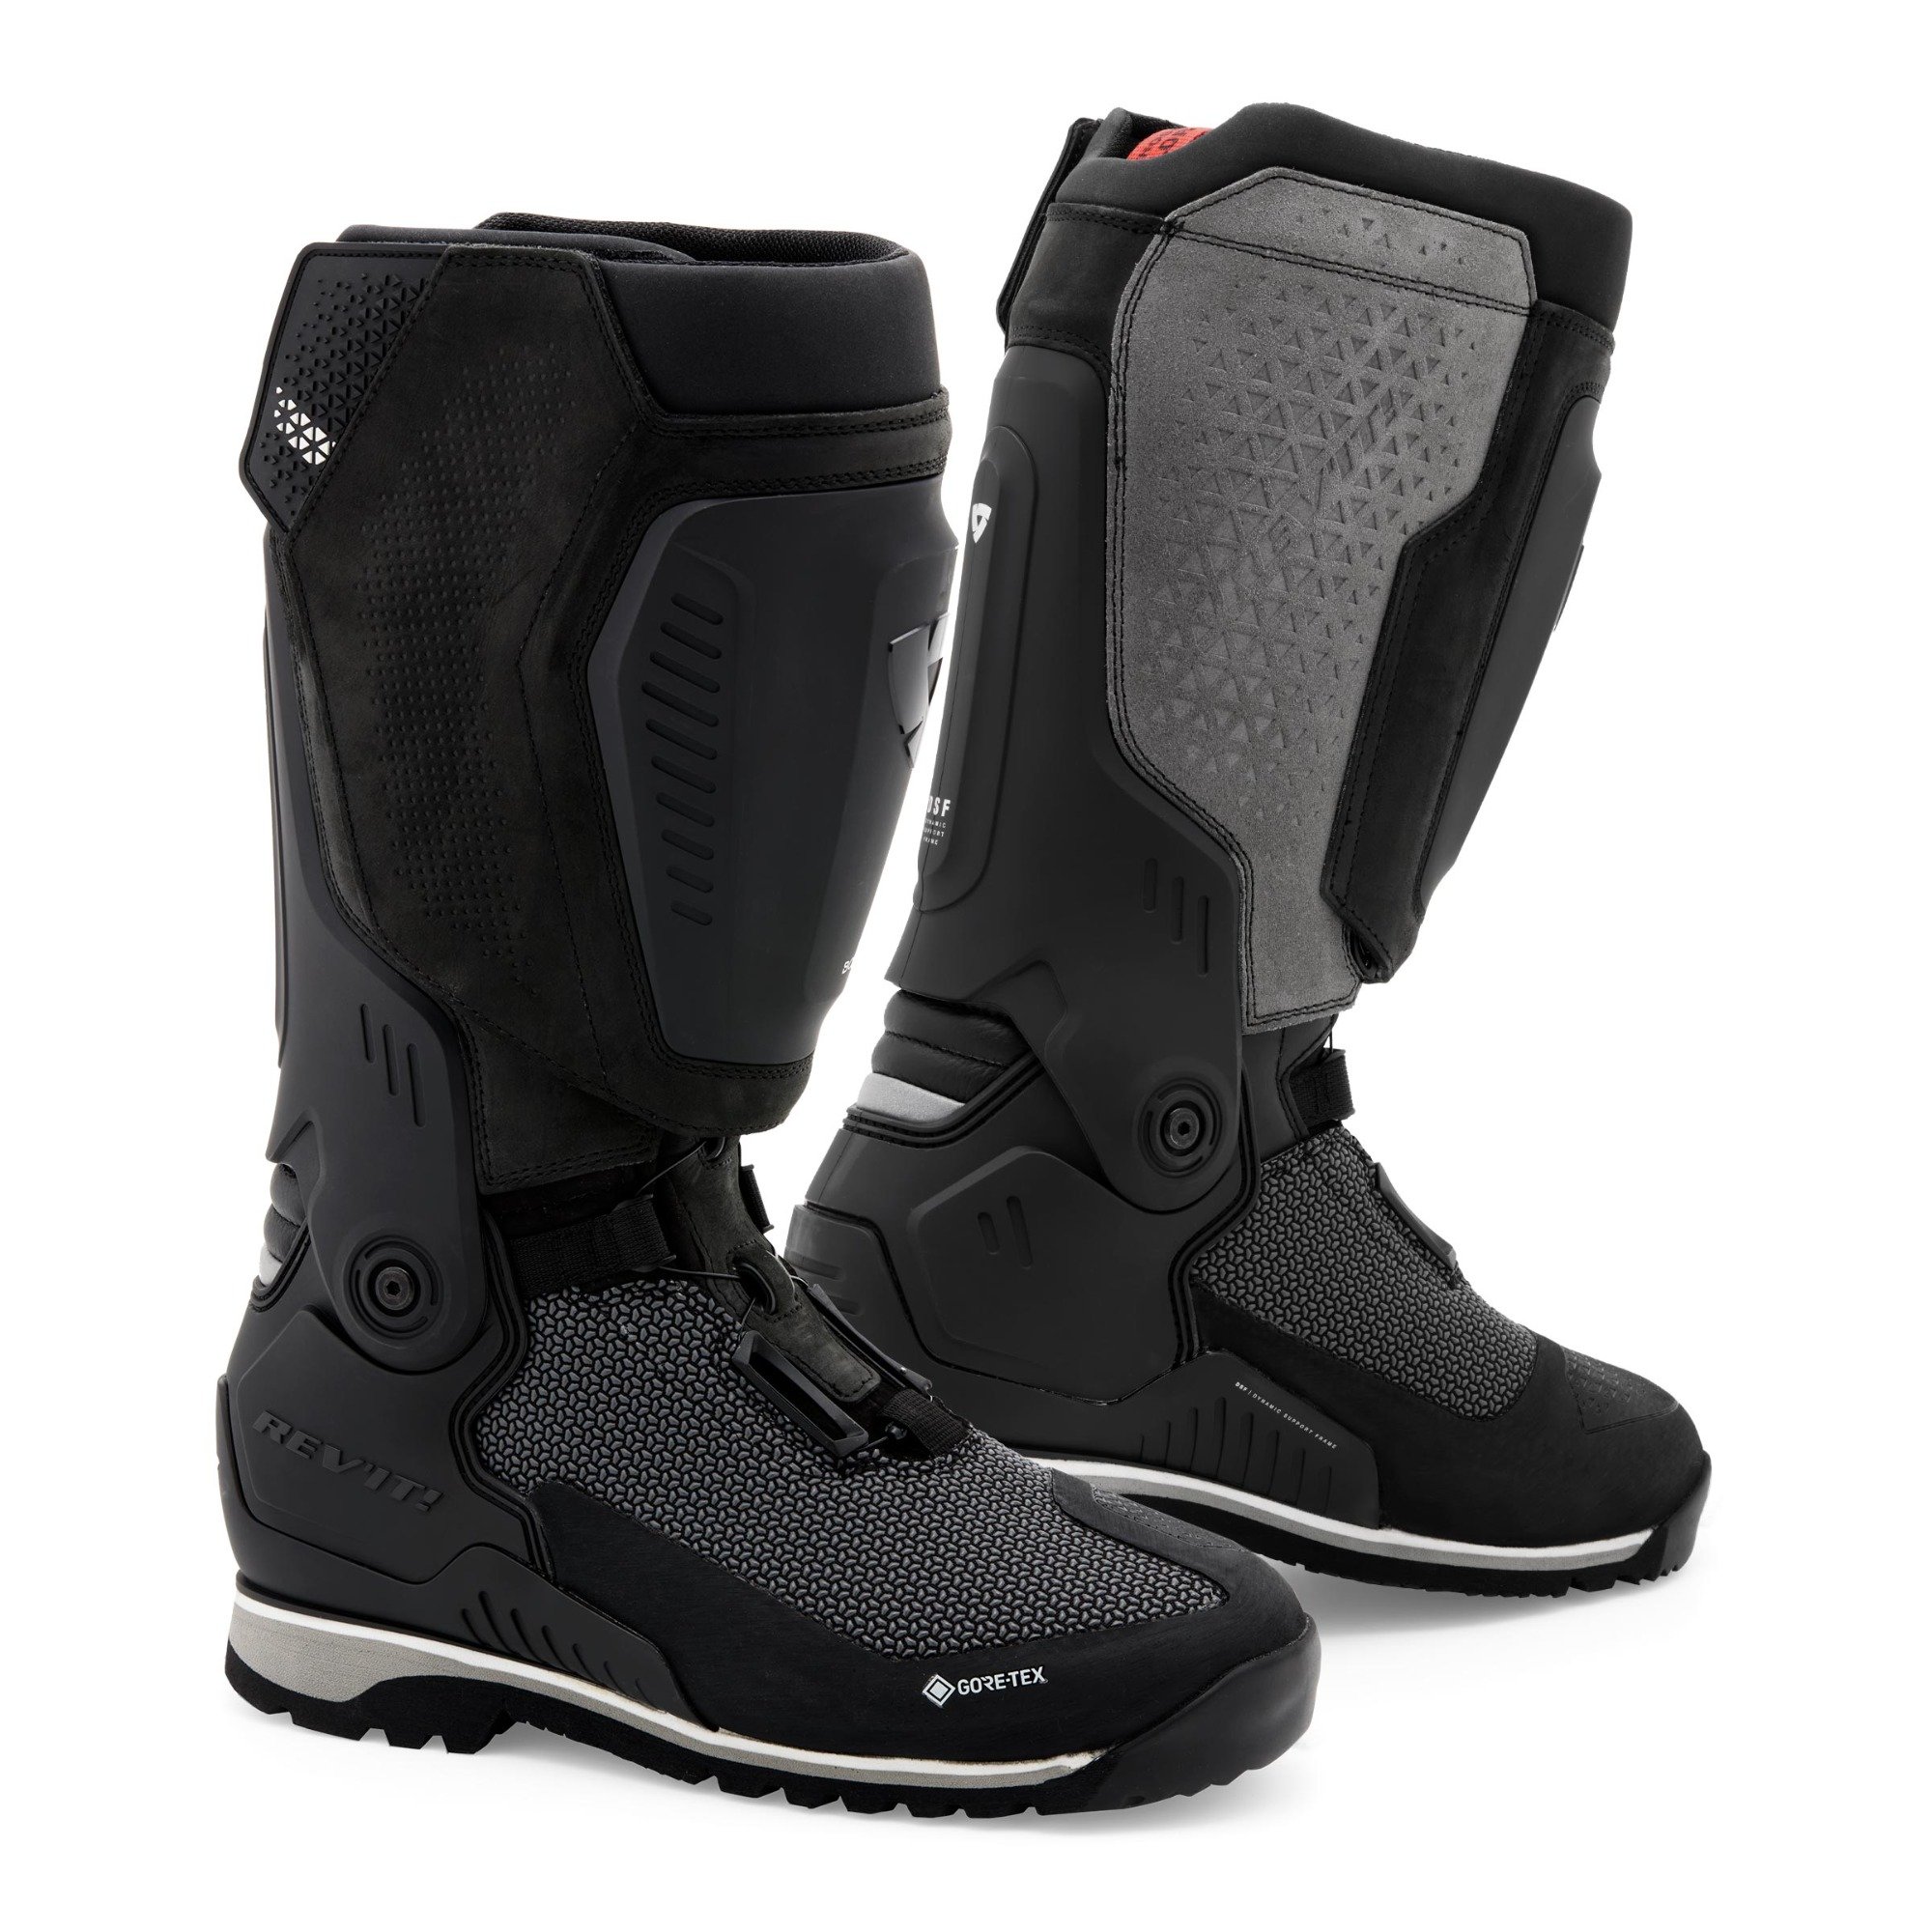 Image of REV'IT! Expedition GTX Boots Black Grey Size 42 ID 8700001327893